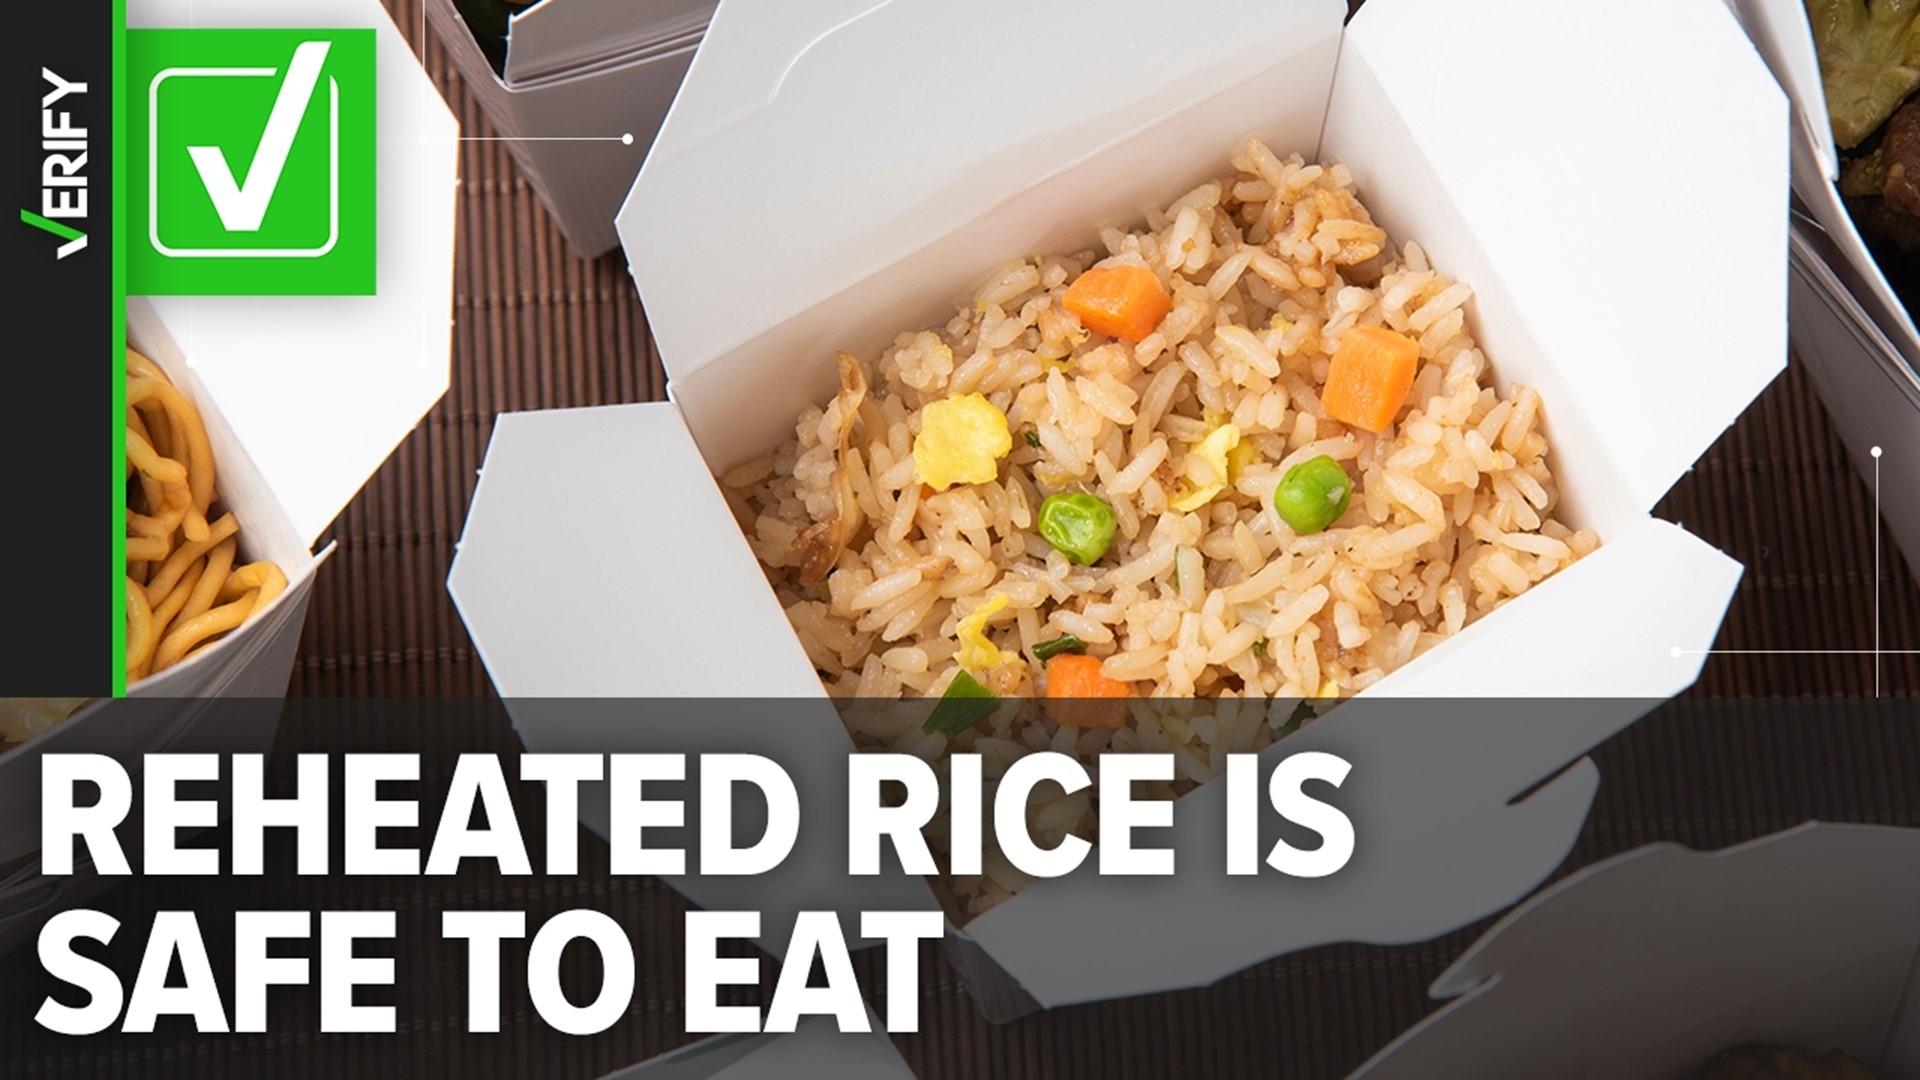 A viral video claims eating leftover rice can cause food poisoning. But we can VERIFY rice refrigerated within two hours of cooking is perfectly safe to eat.